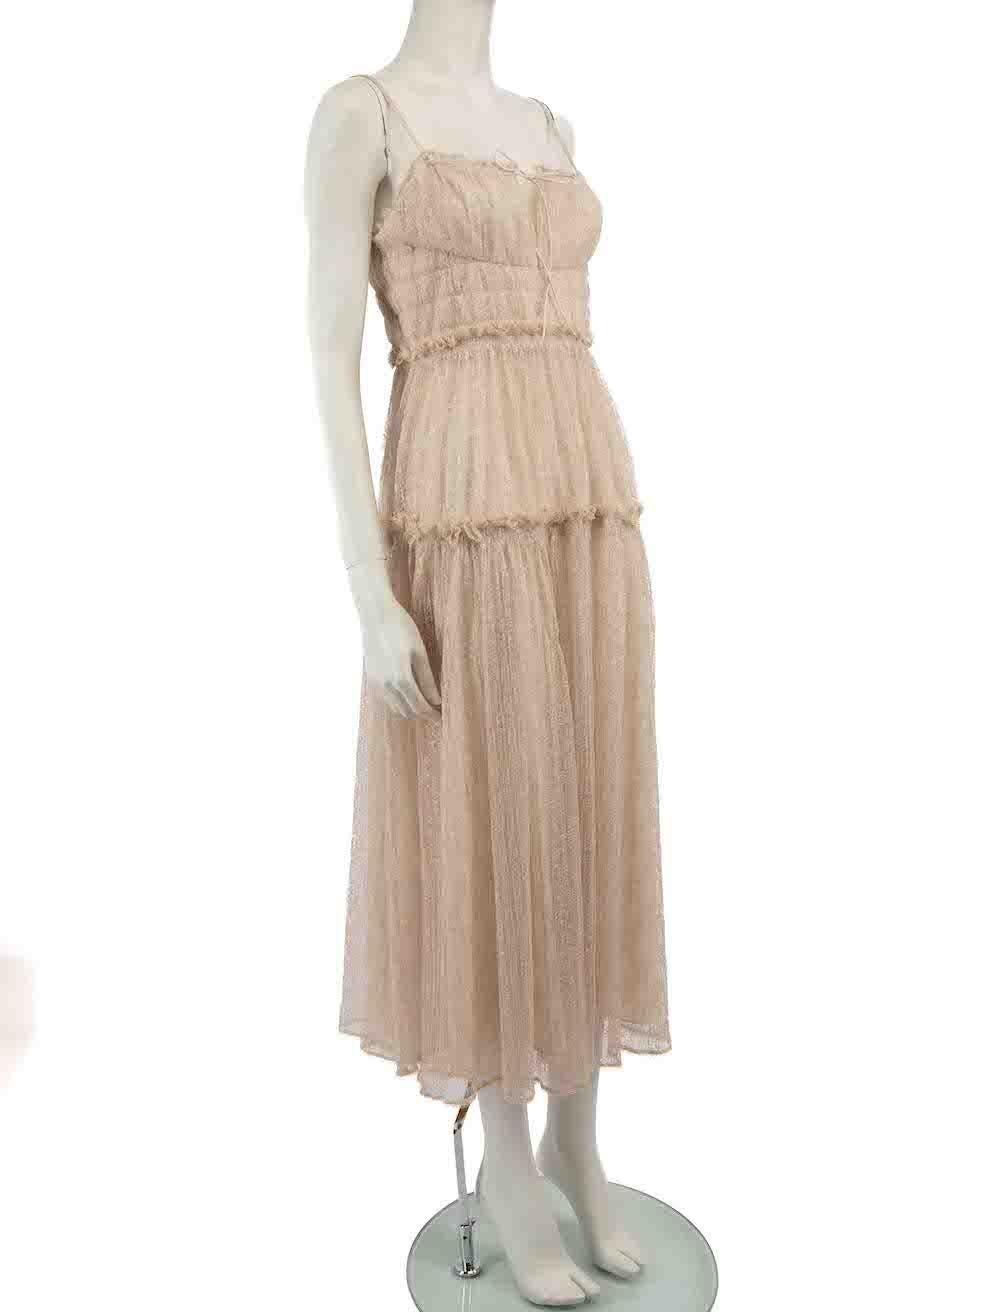 CONDITION is Very good. Hardly any visible wear to dress is evident on this used Jonathan Simkhai designer resale item.
 
 
 
 Details
 
 
 Beige
 
 Polyester lace
 
 Dress
 
 Sleeveless
 
 Front tie detail
 
 Midi
 
 Back zip and hook fastening
 
